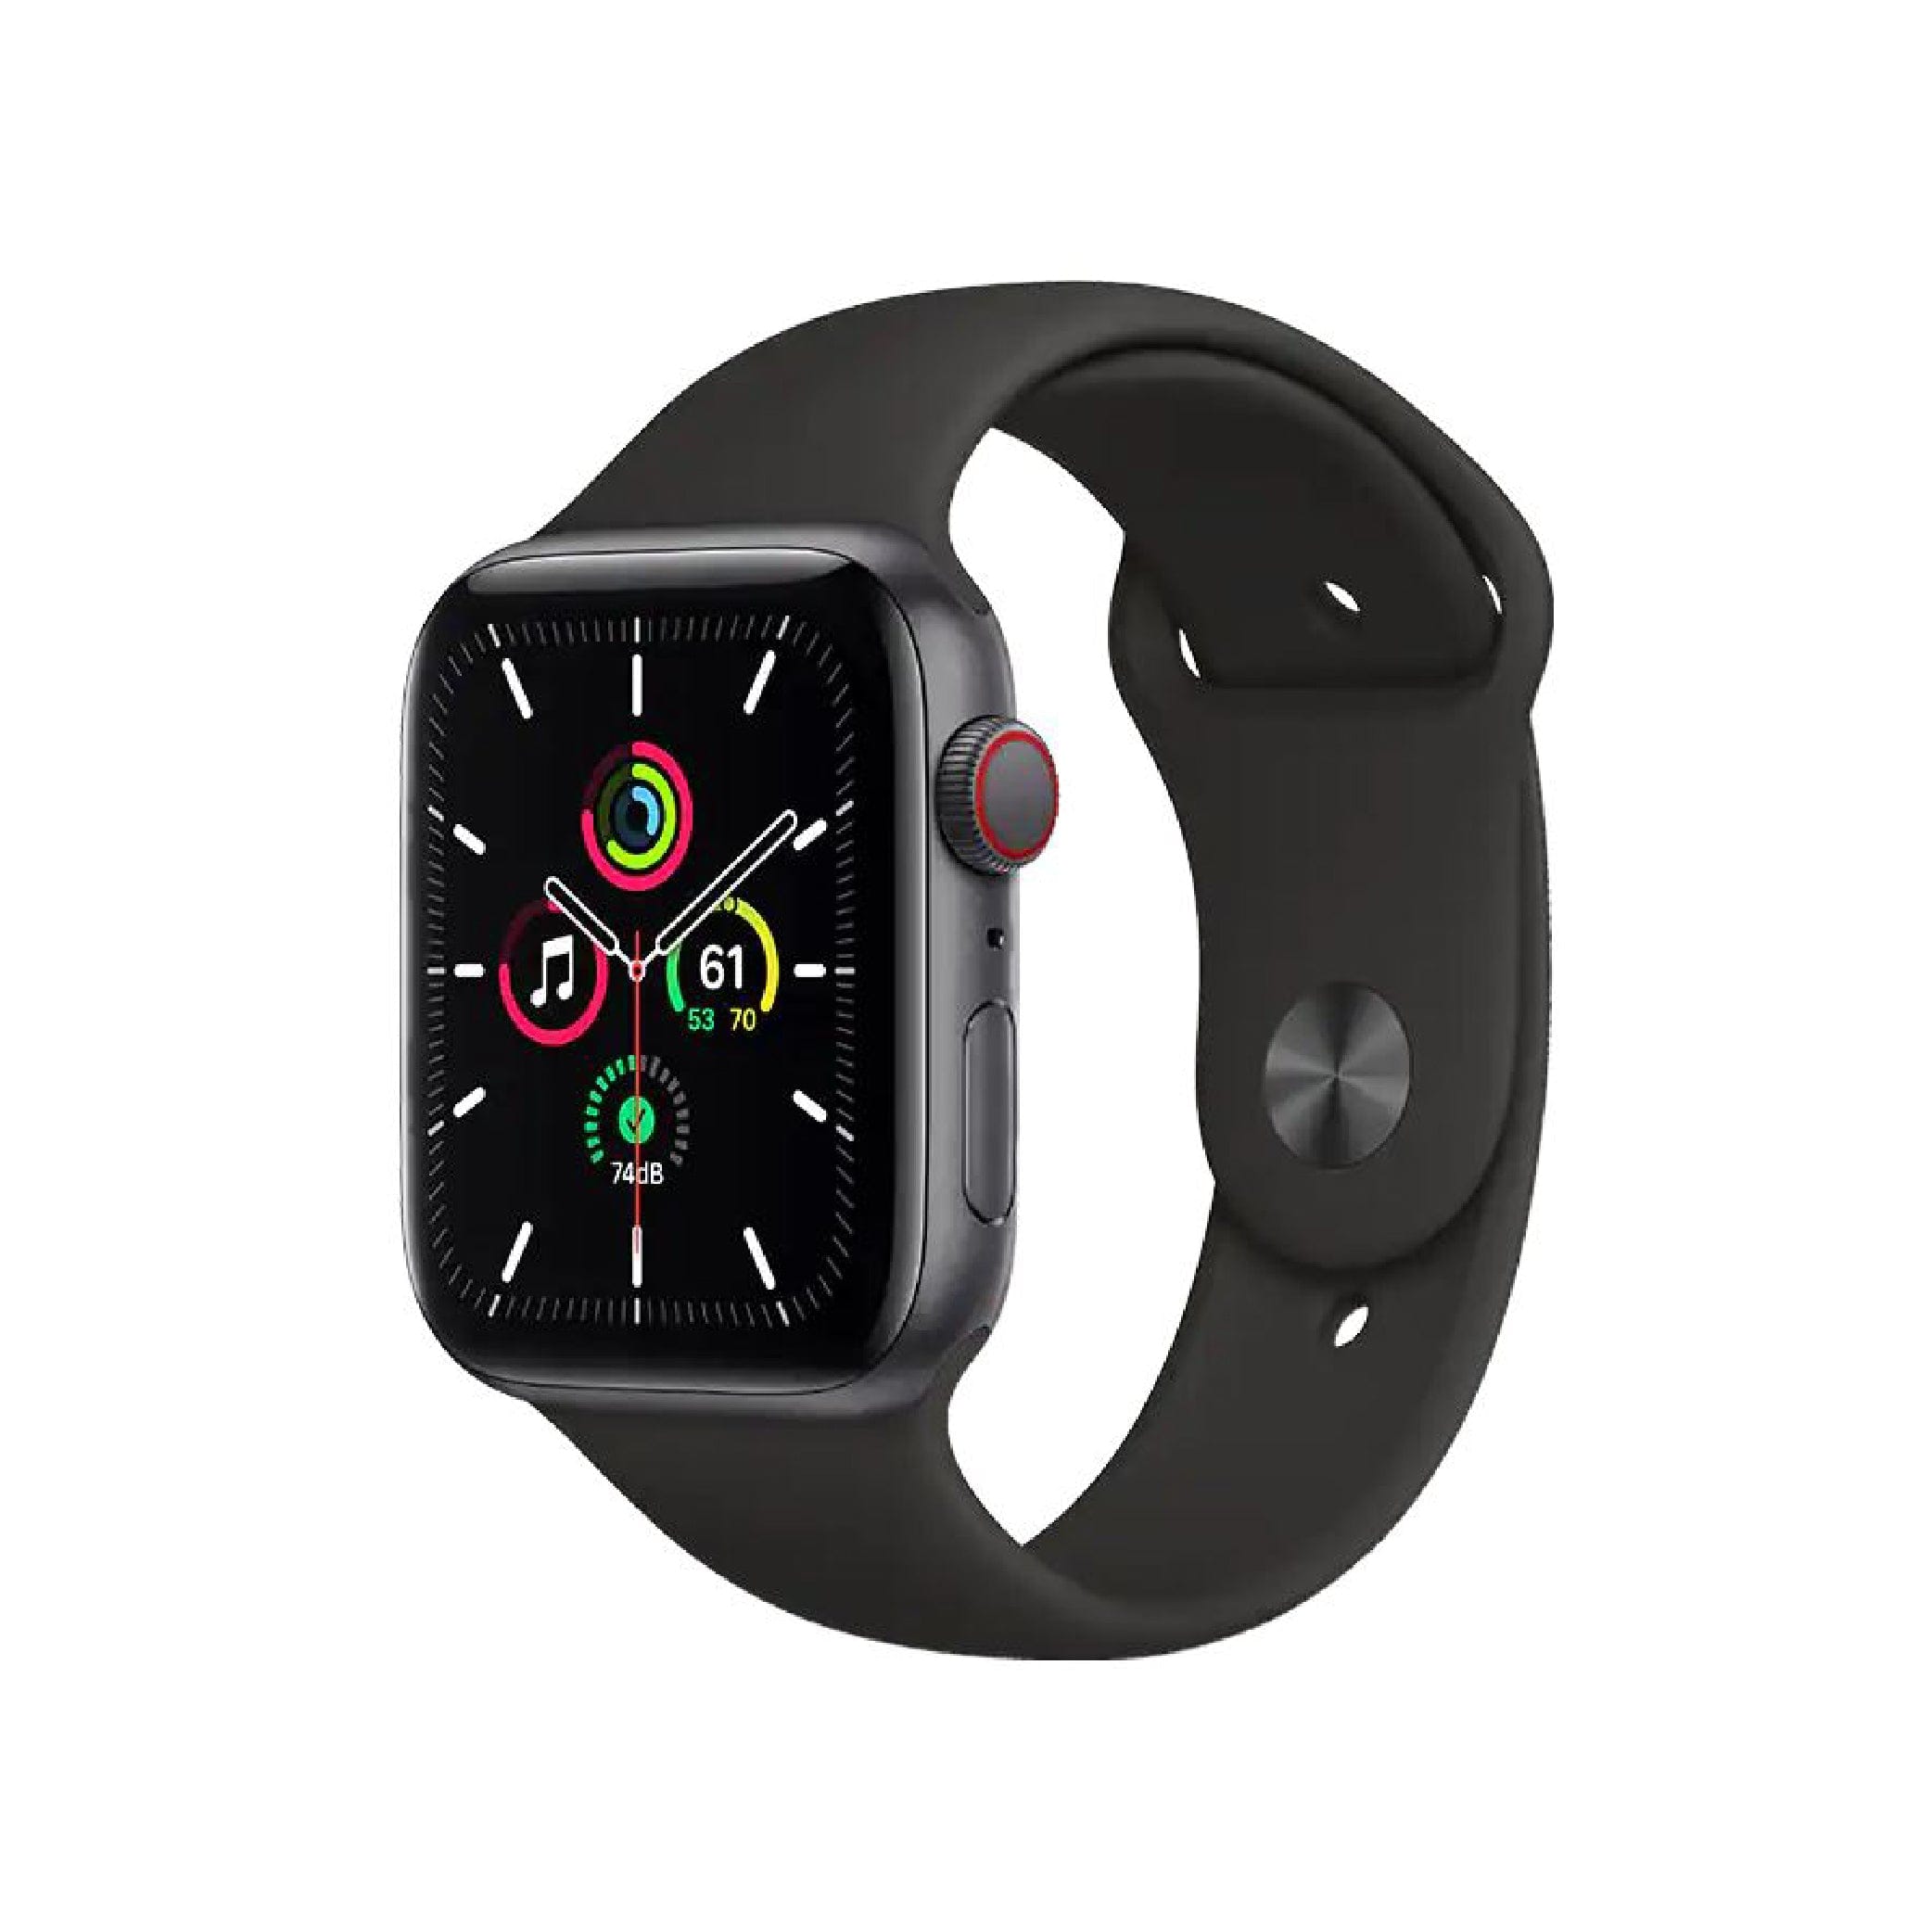 Apple Watch (Series SE) September 2020 Aluminum Space Gray / Silver / Gold - Silicone Band  (Refurbished-Excellent condition)